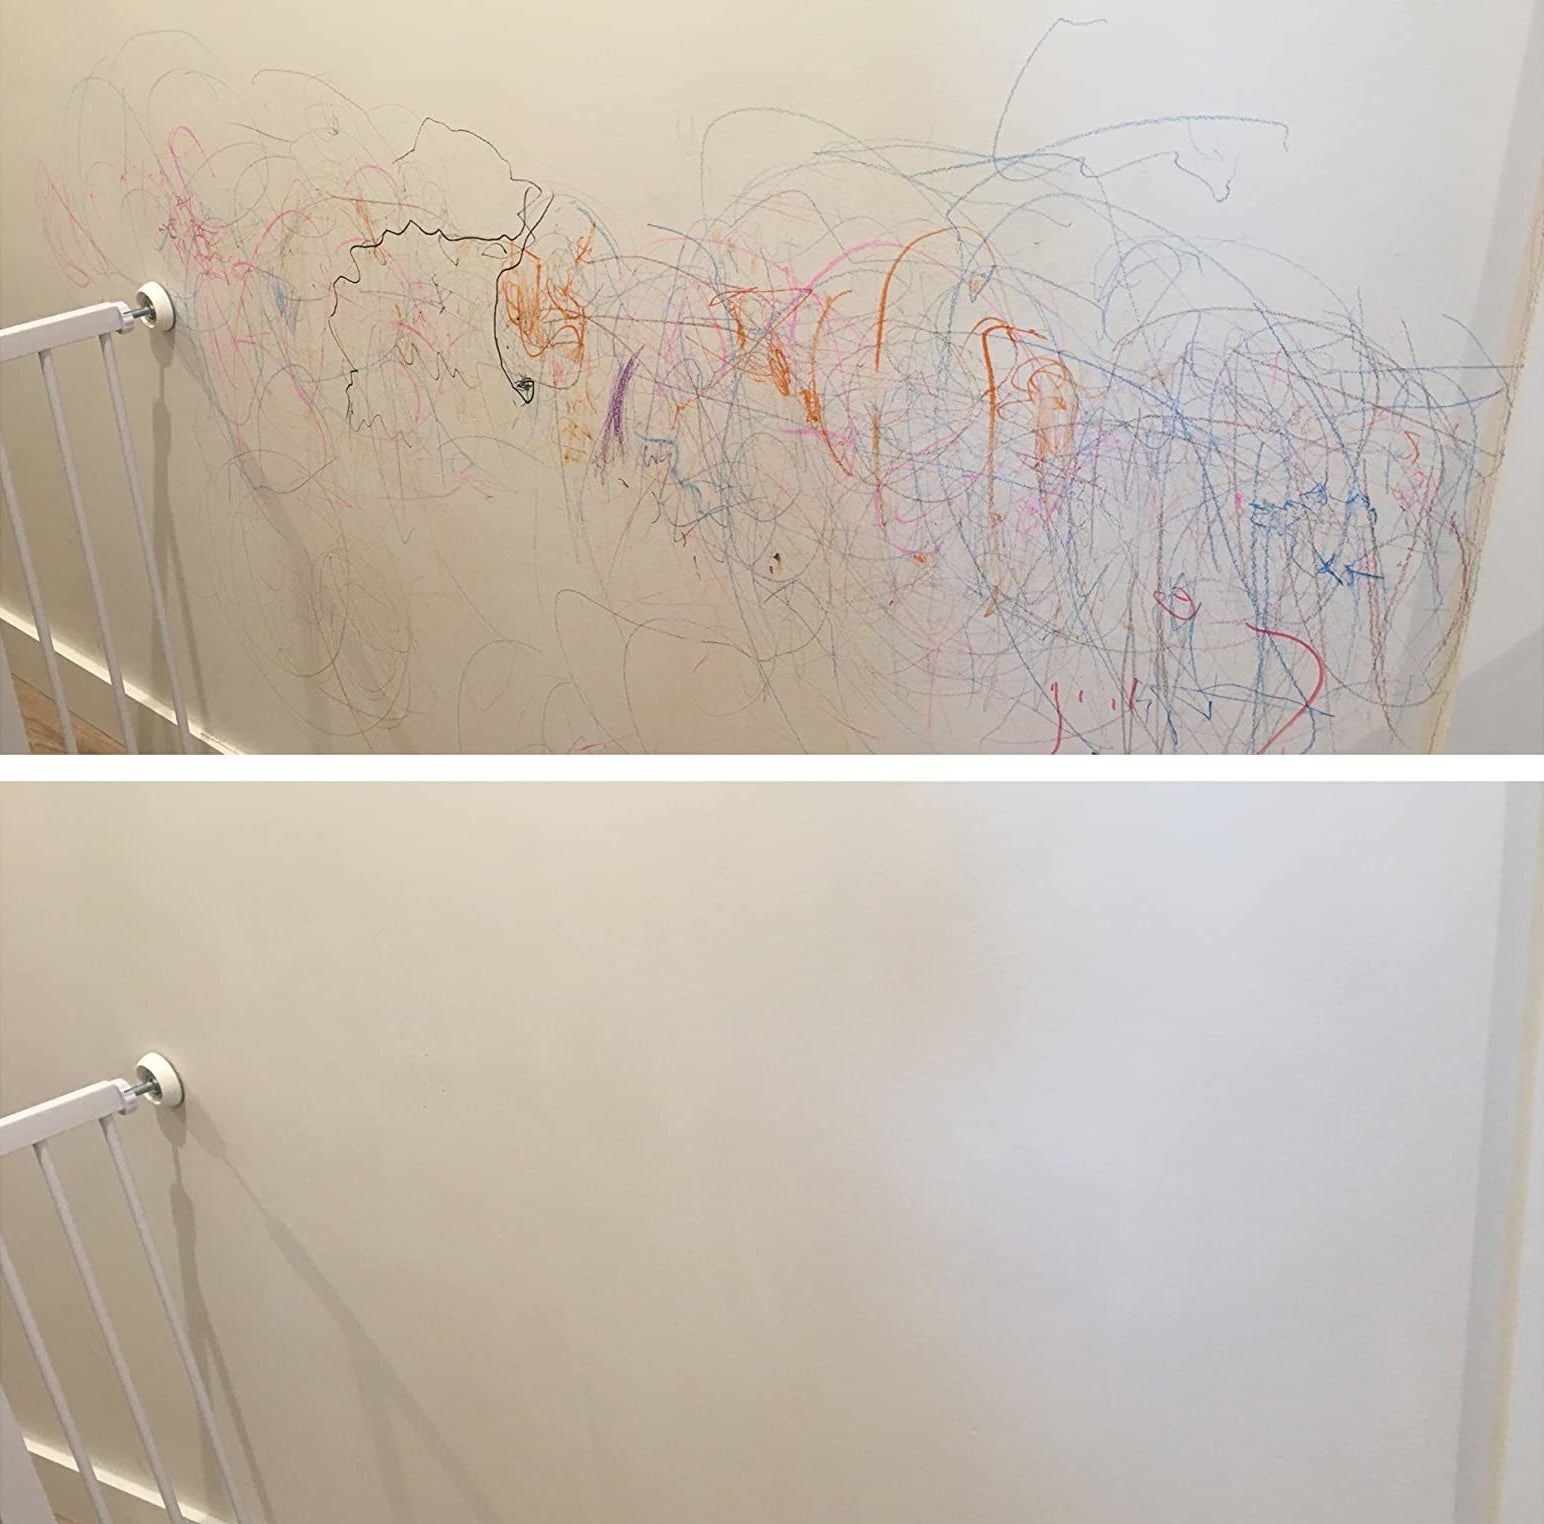 wall covered in colorful scribbles then clean